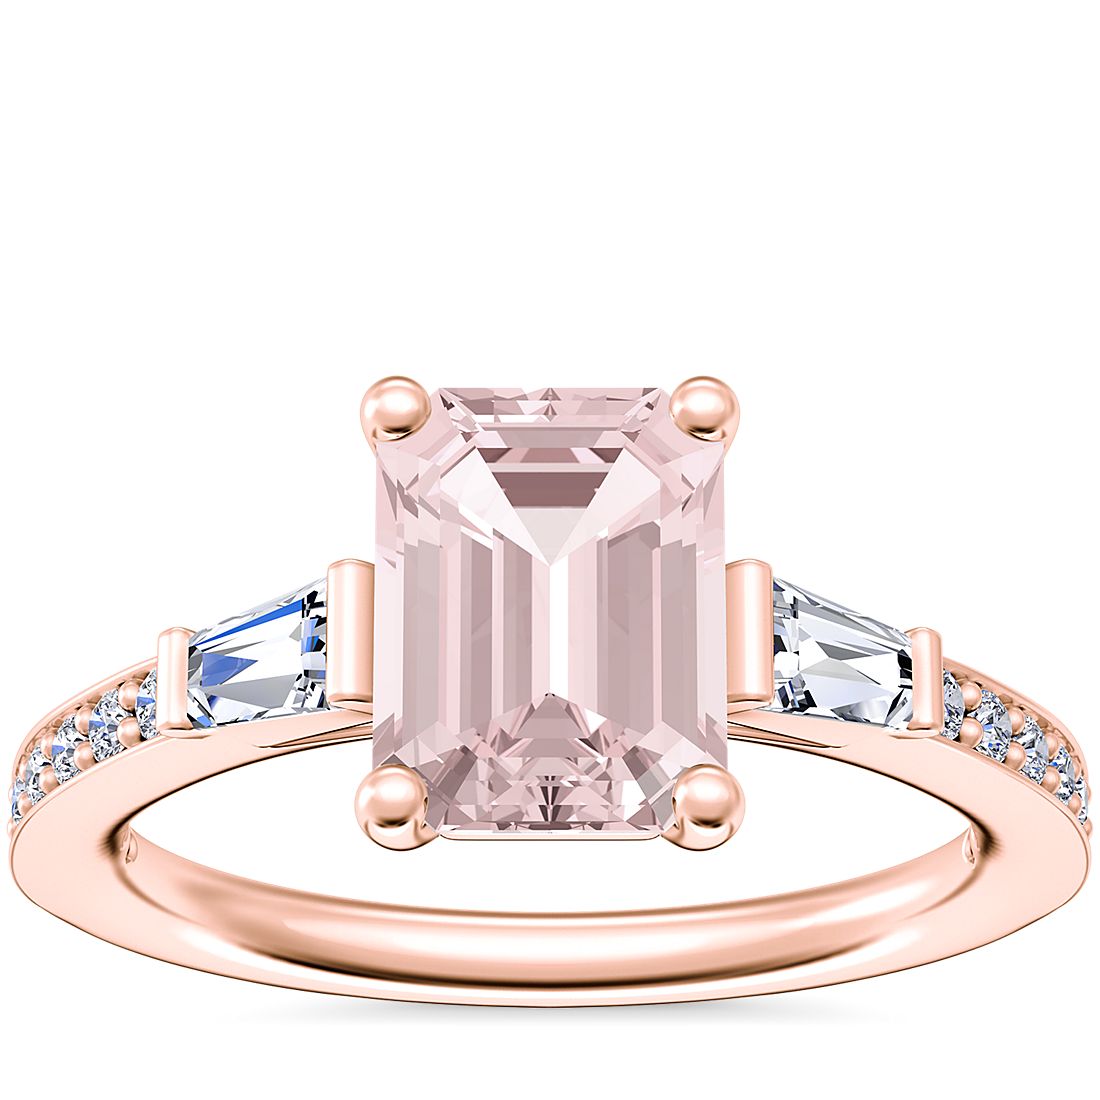 Tapered Baguette Diamond Cathedral Engagement Ring with Emerald-Cut Morganite in 14k Rose Gold (8x6mm)